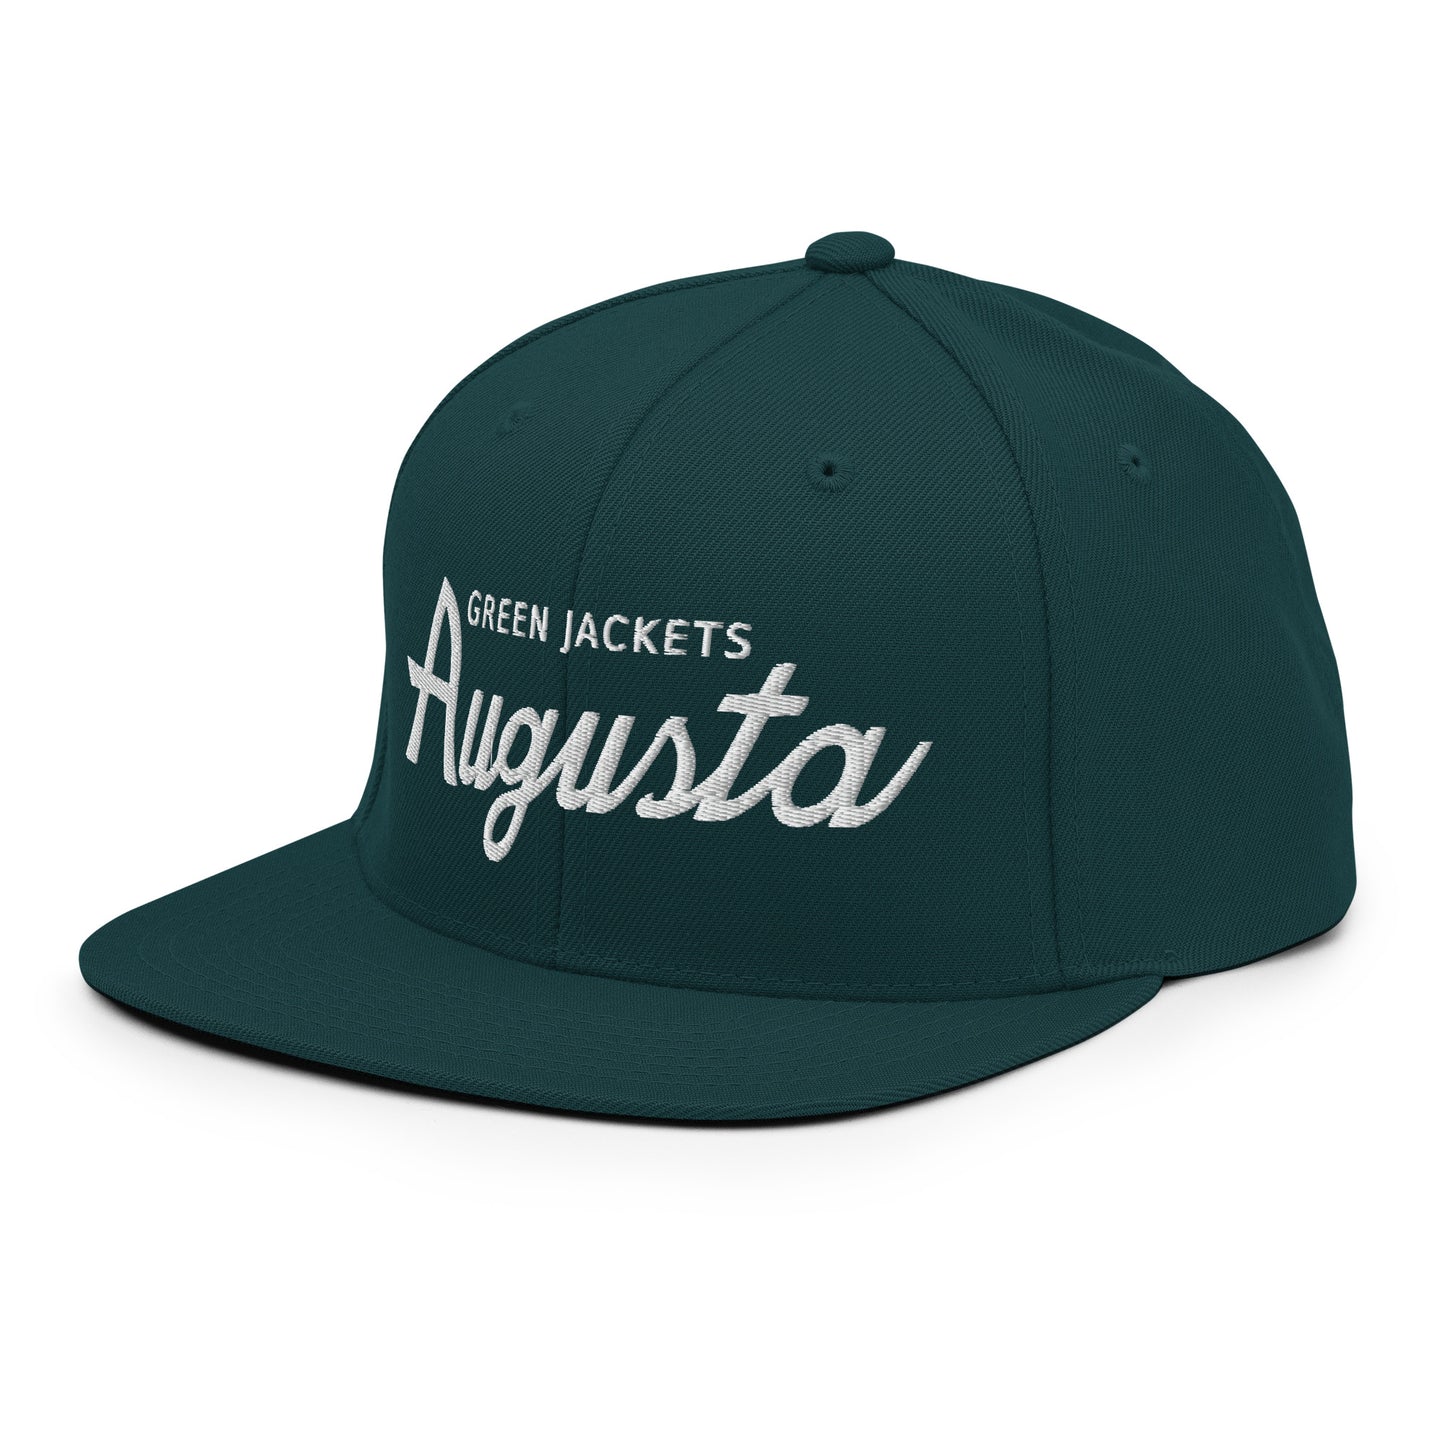 Augusta Green Jackets SnapBack (Limited Edition)